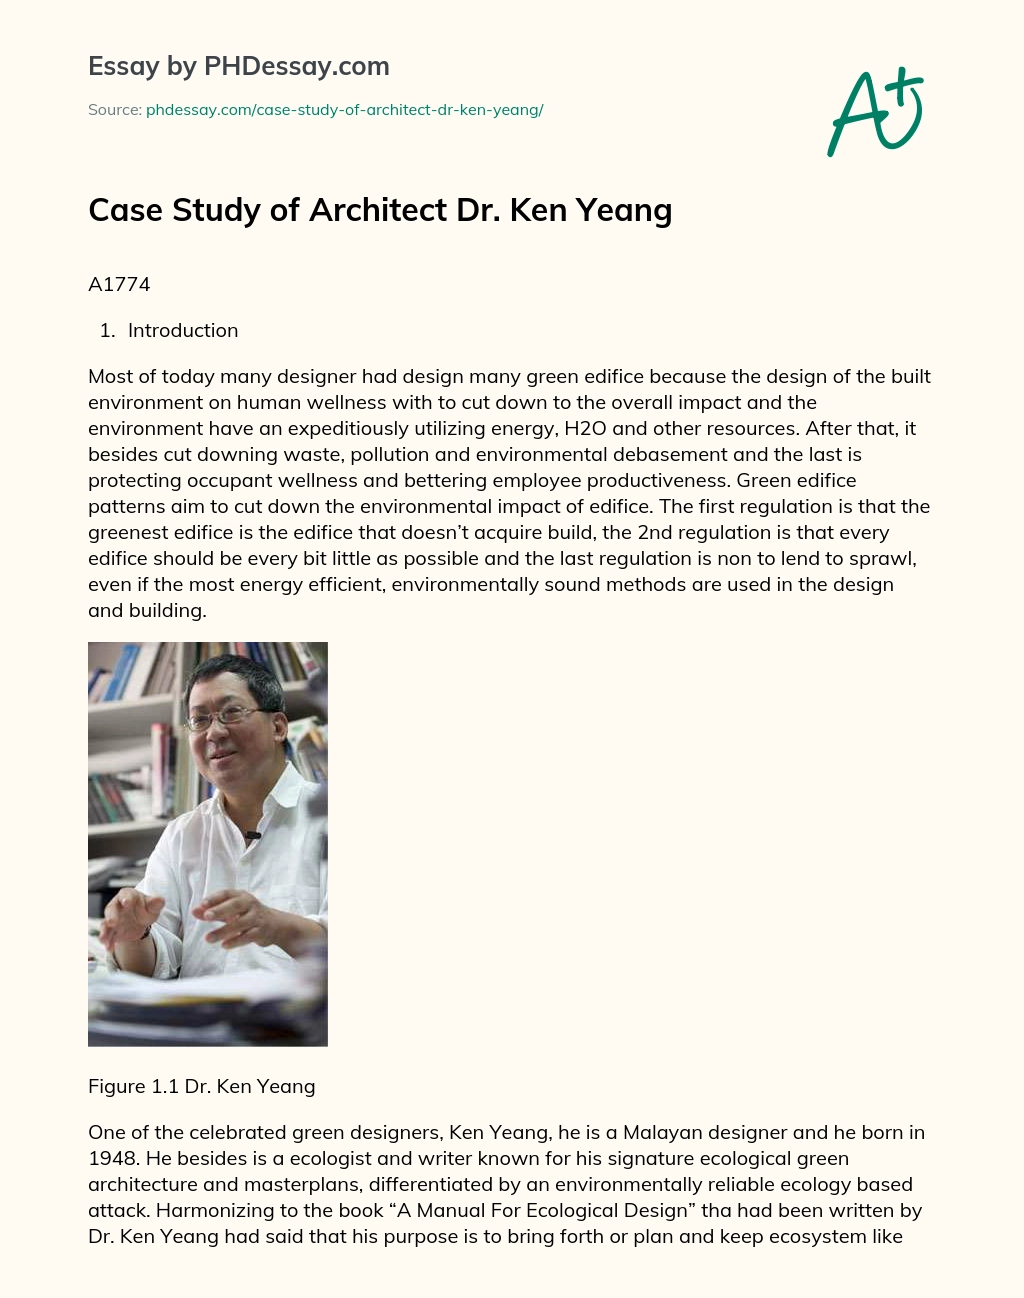 Case Study of Architect Dr. Ken Yeang essay